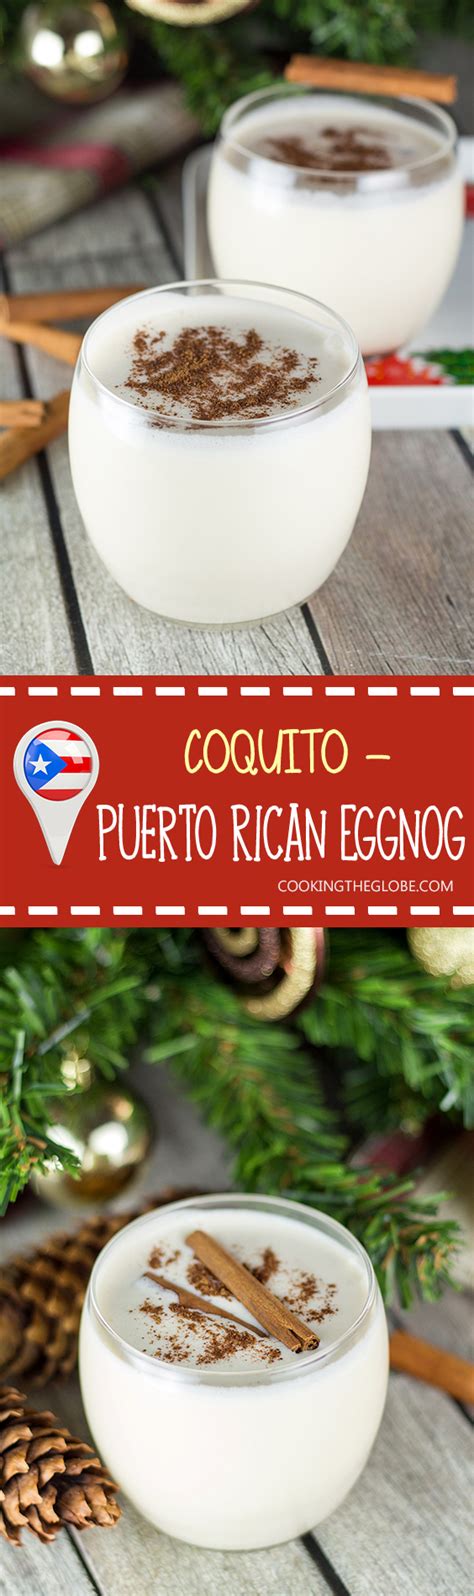 Perfect for santa to enjoy! How to Make Coquito (Puerto Rican Eggnog) in a Flash